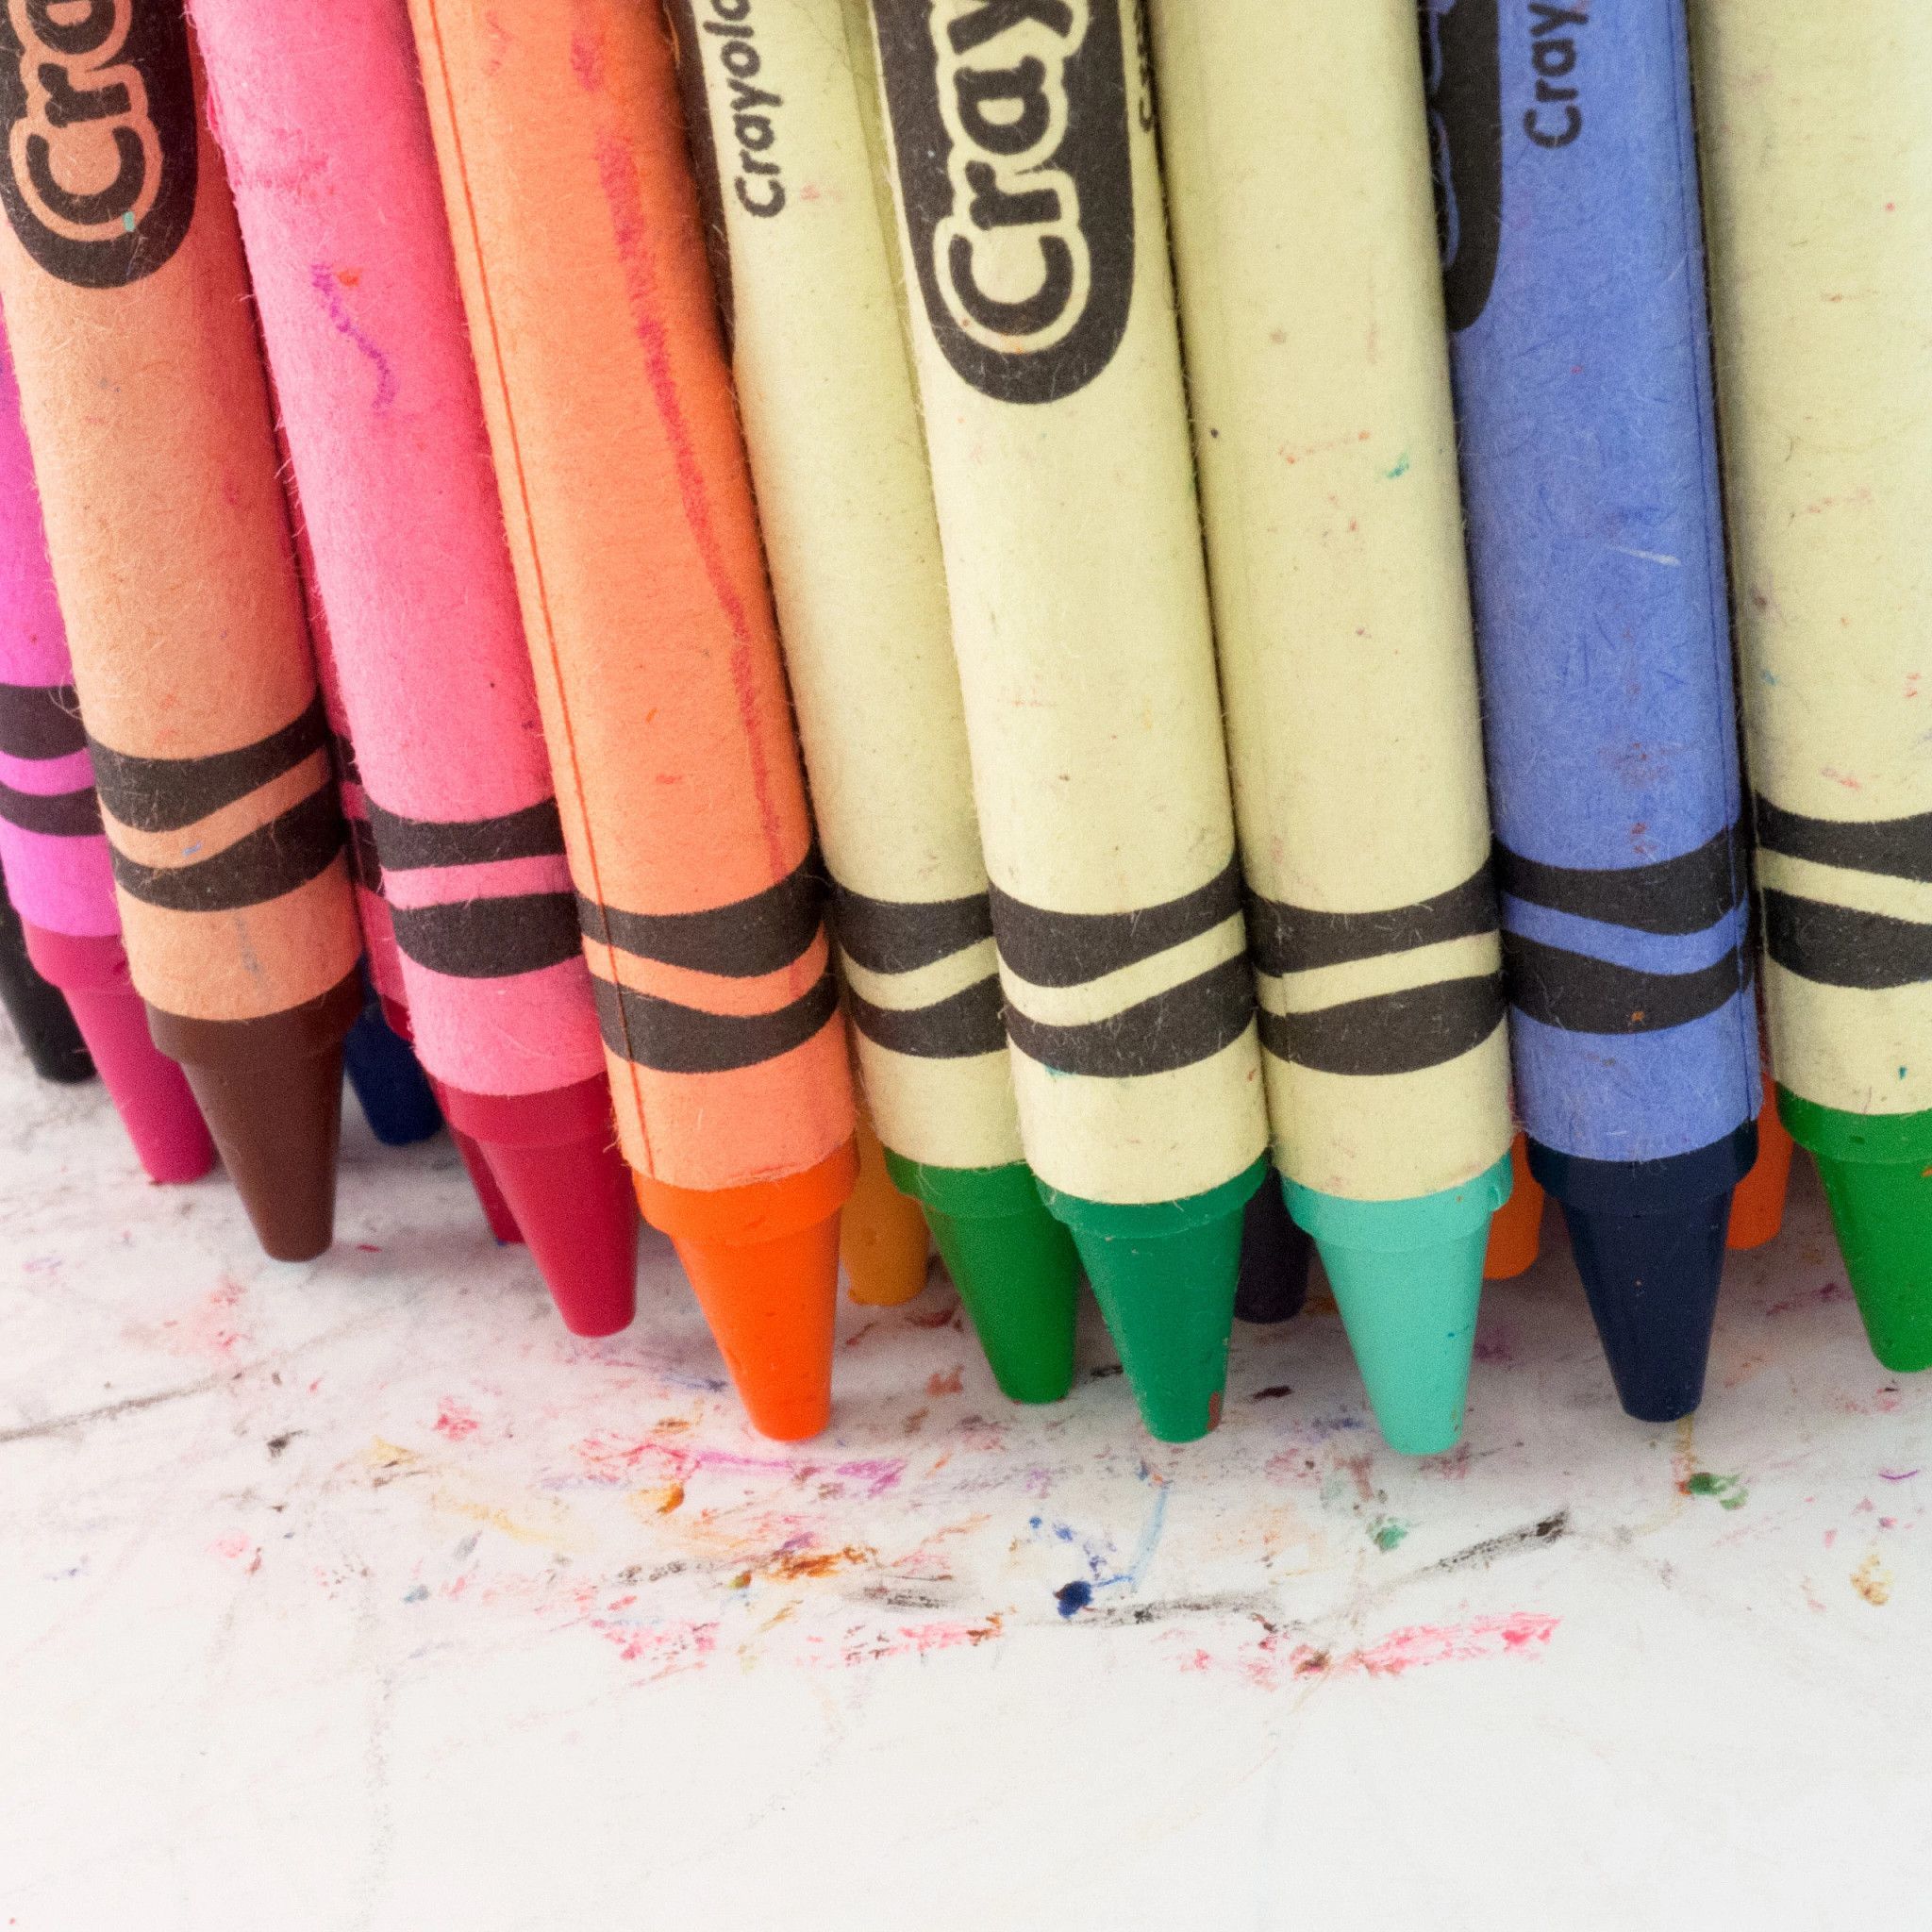 Crayola Crayon Set, 96-Colors, School Supplies, Art Gifts for Kids - image 8 of 12